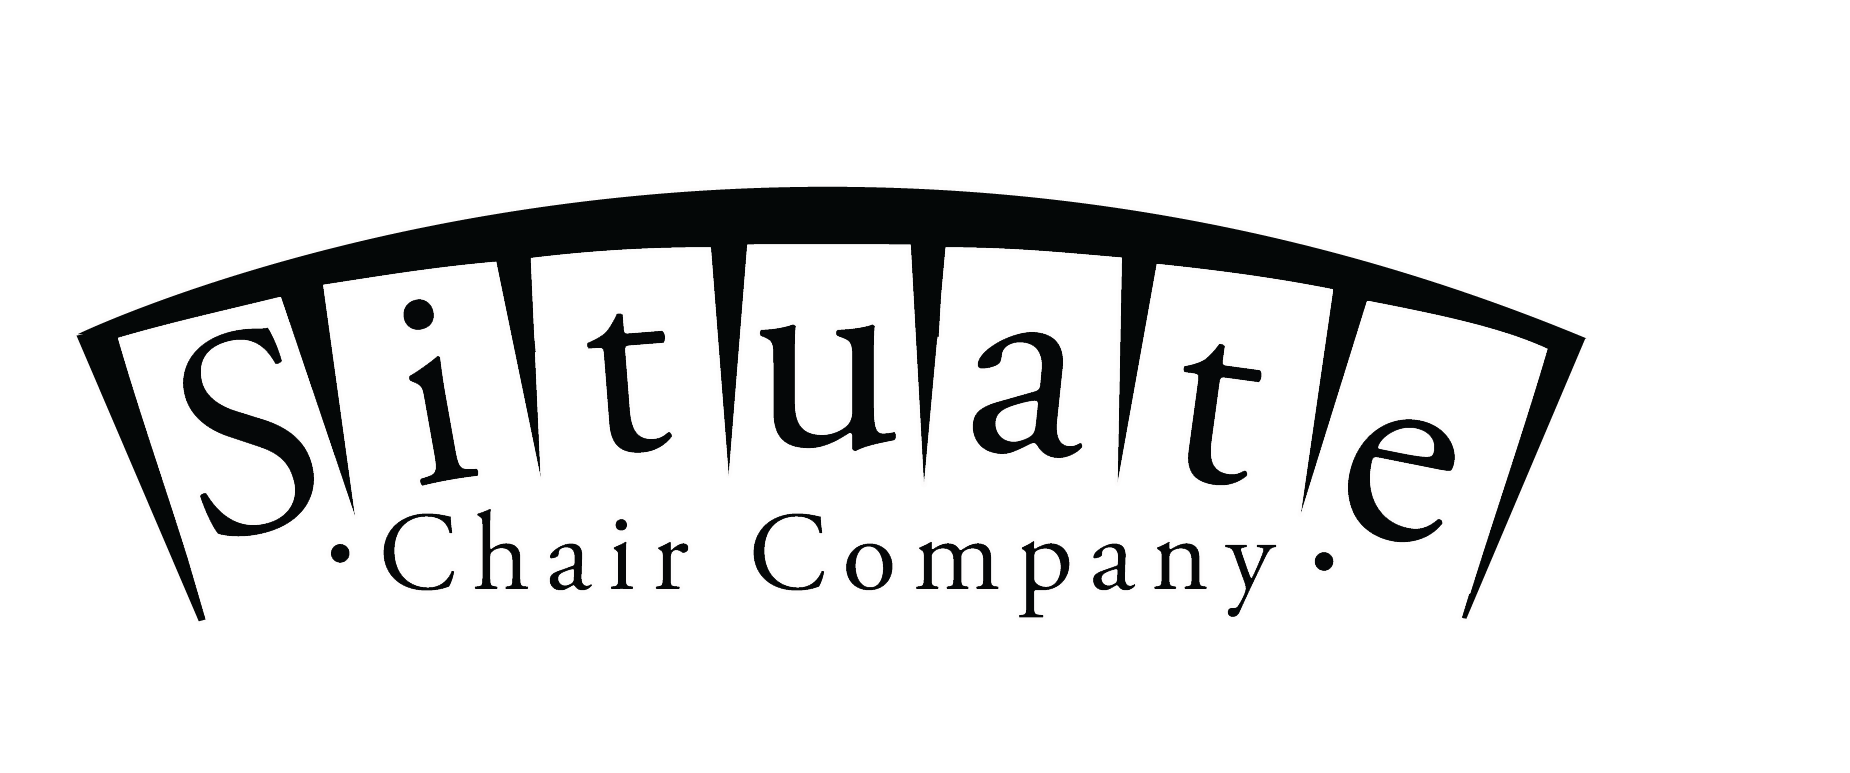 Situate Chair Logo